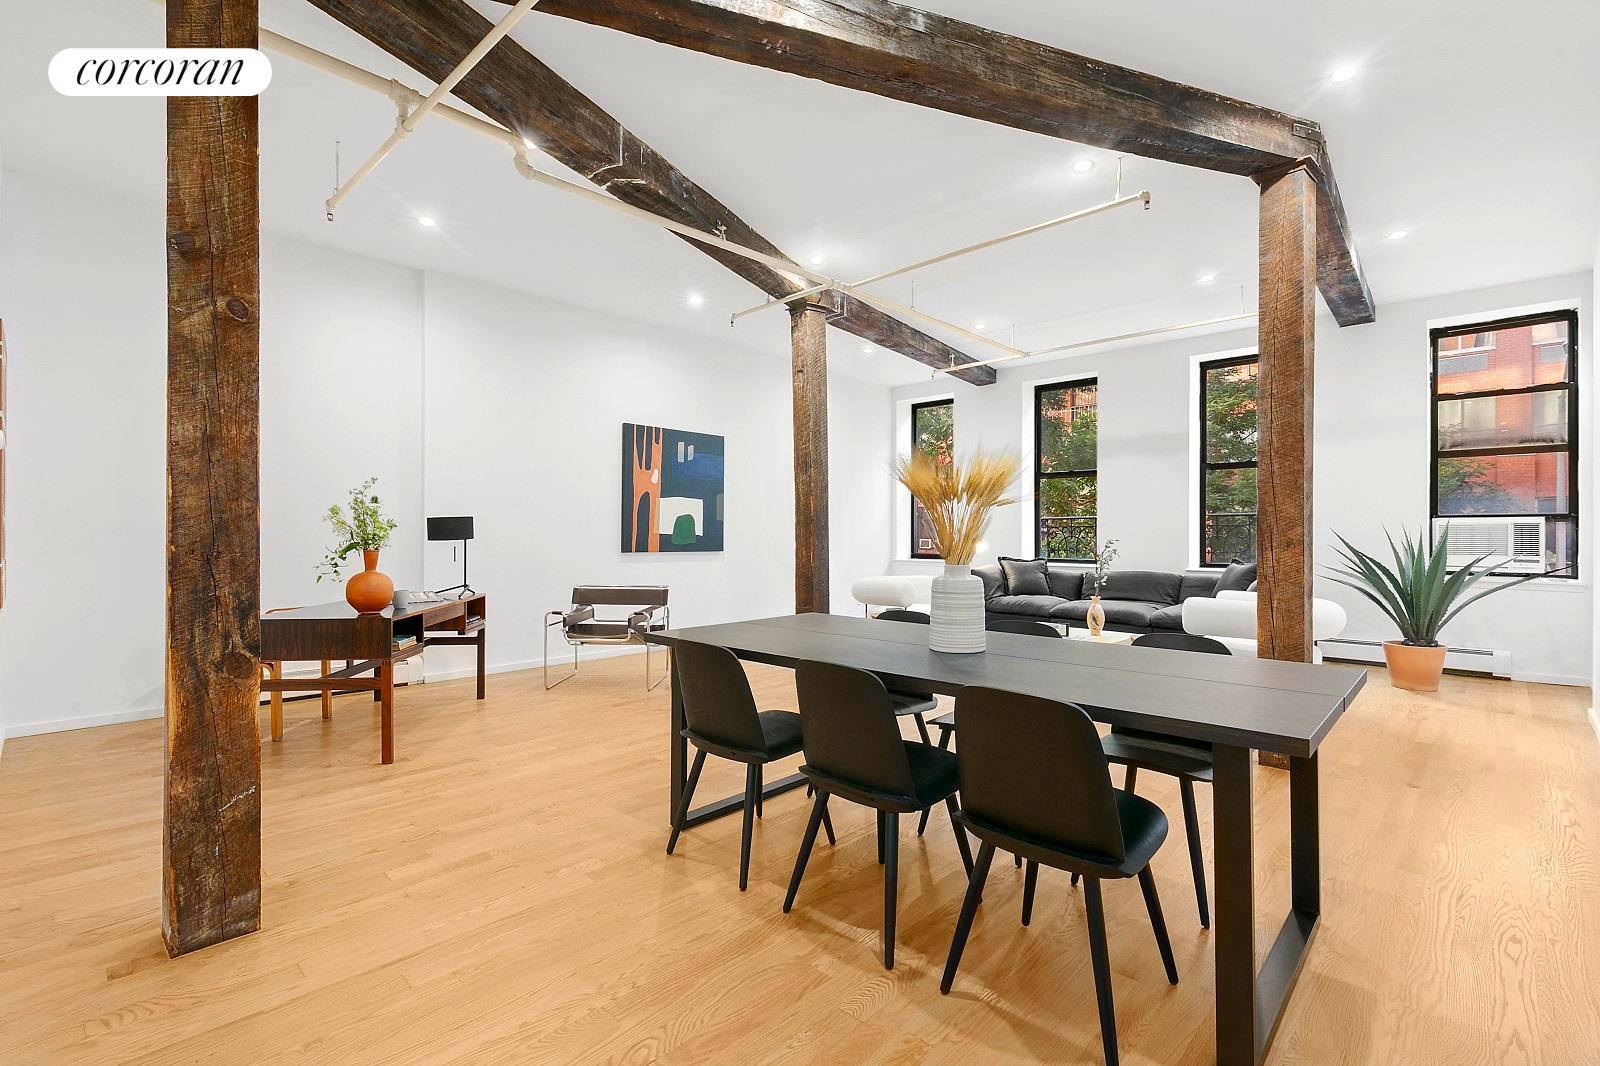 Artisan 1, 500sf two bedroom full floor through LOFT conversion in prime Lower East Side location.